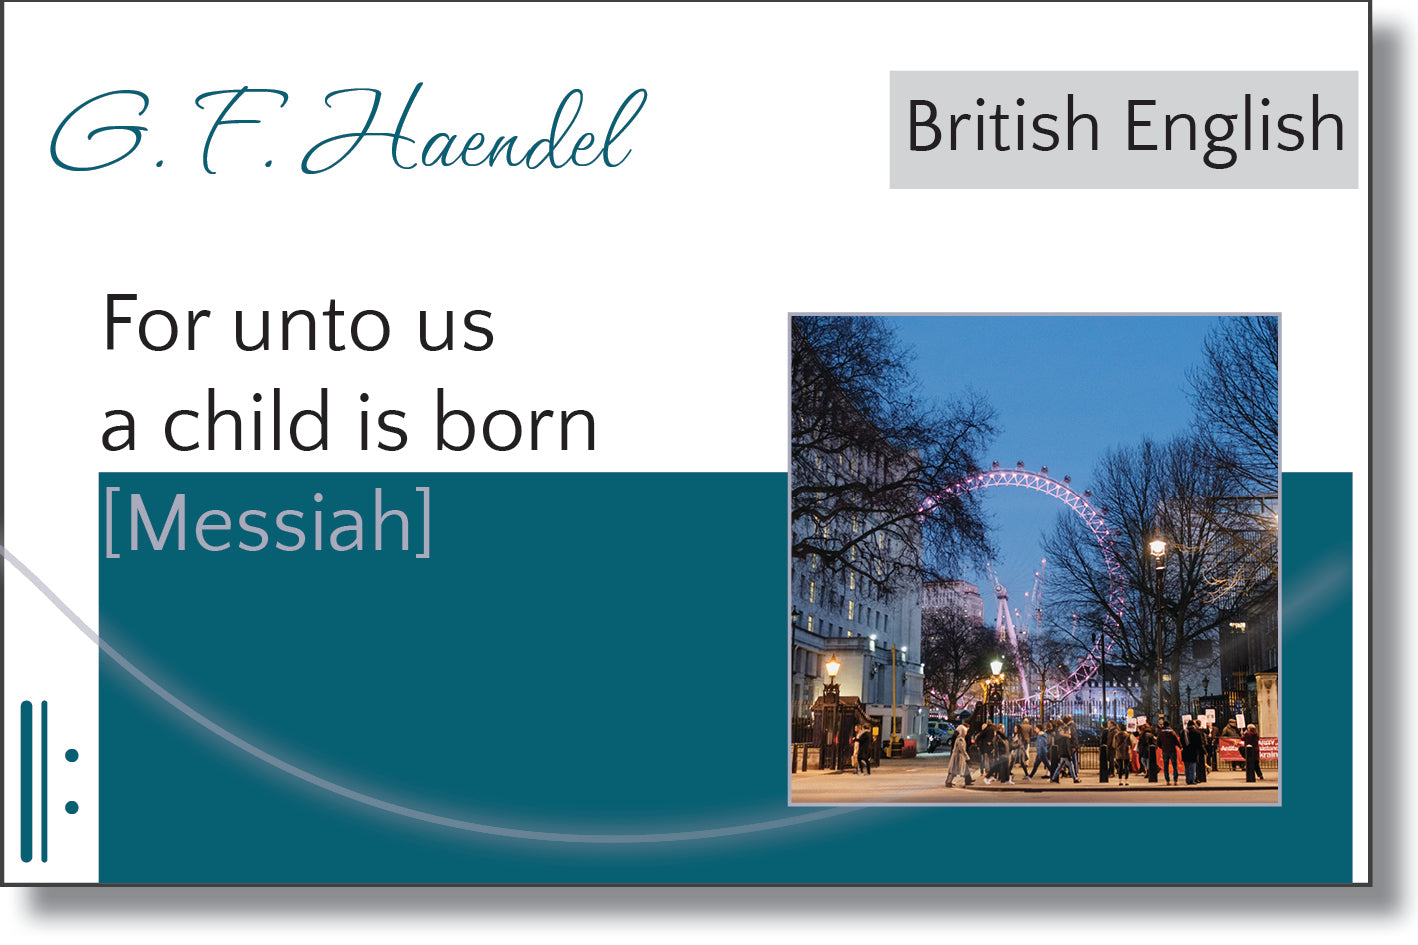 Messiah - For unto us a child is born